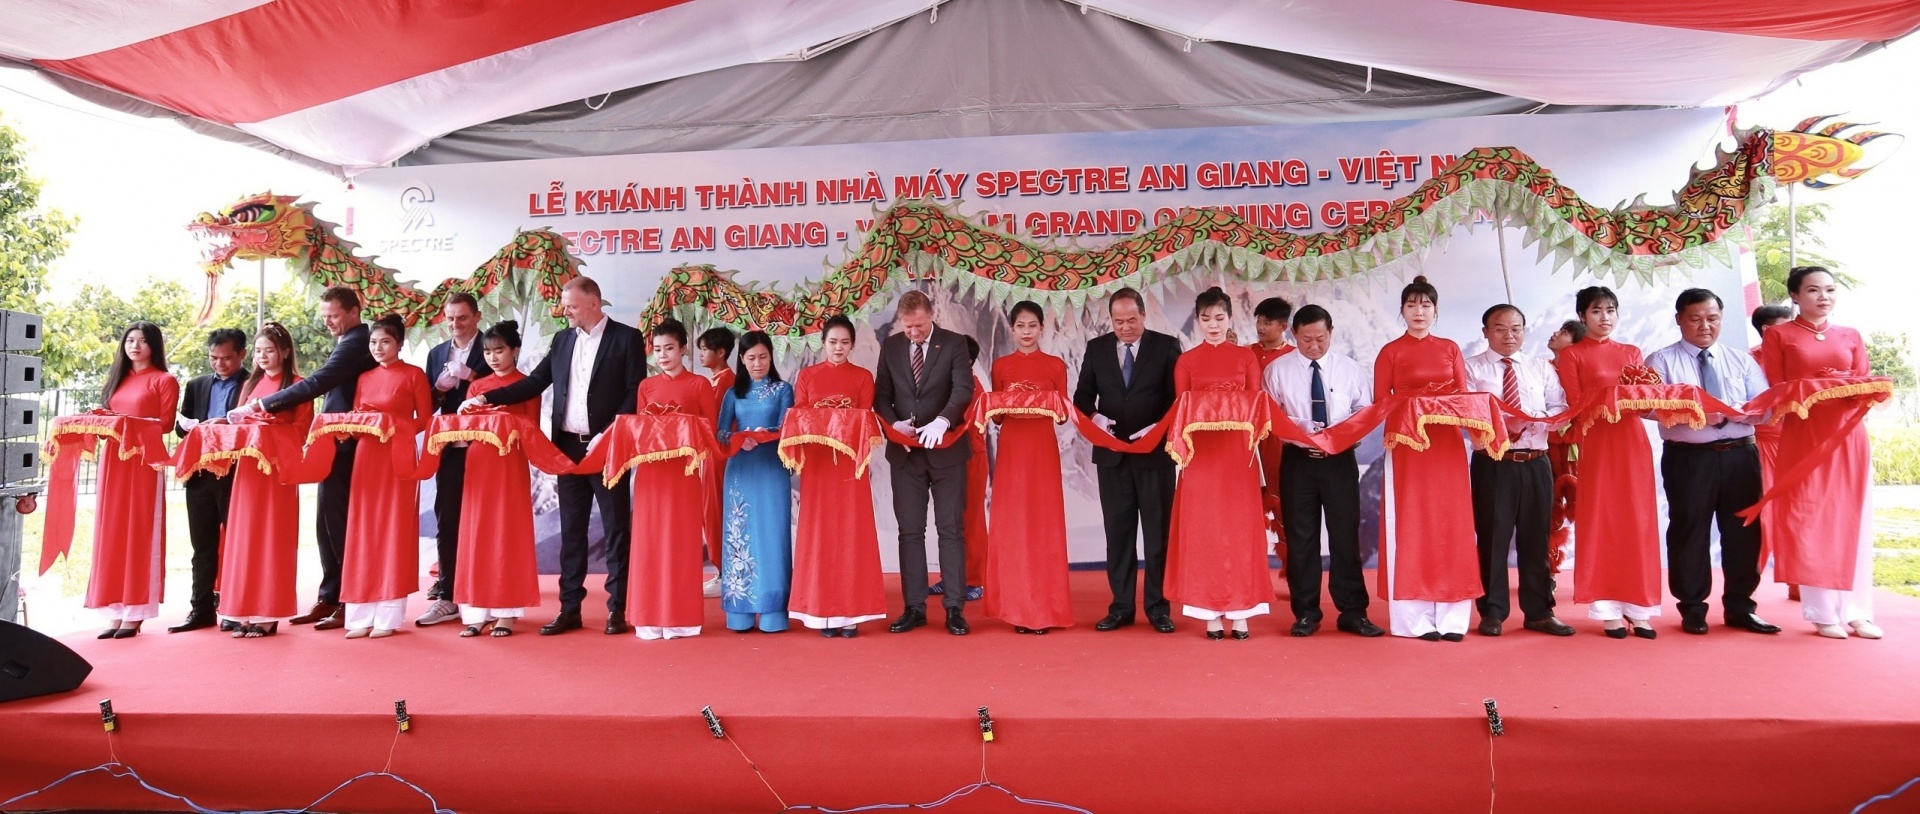 First Danish-invested factory in An Giang starting operation